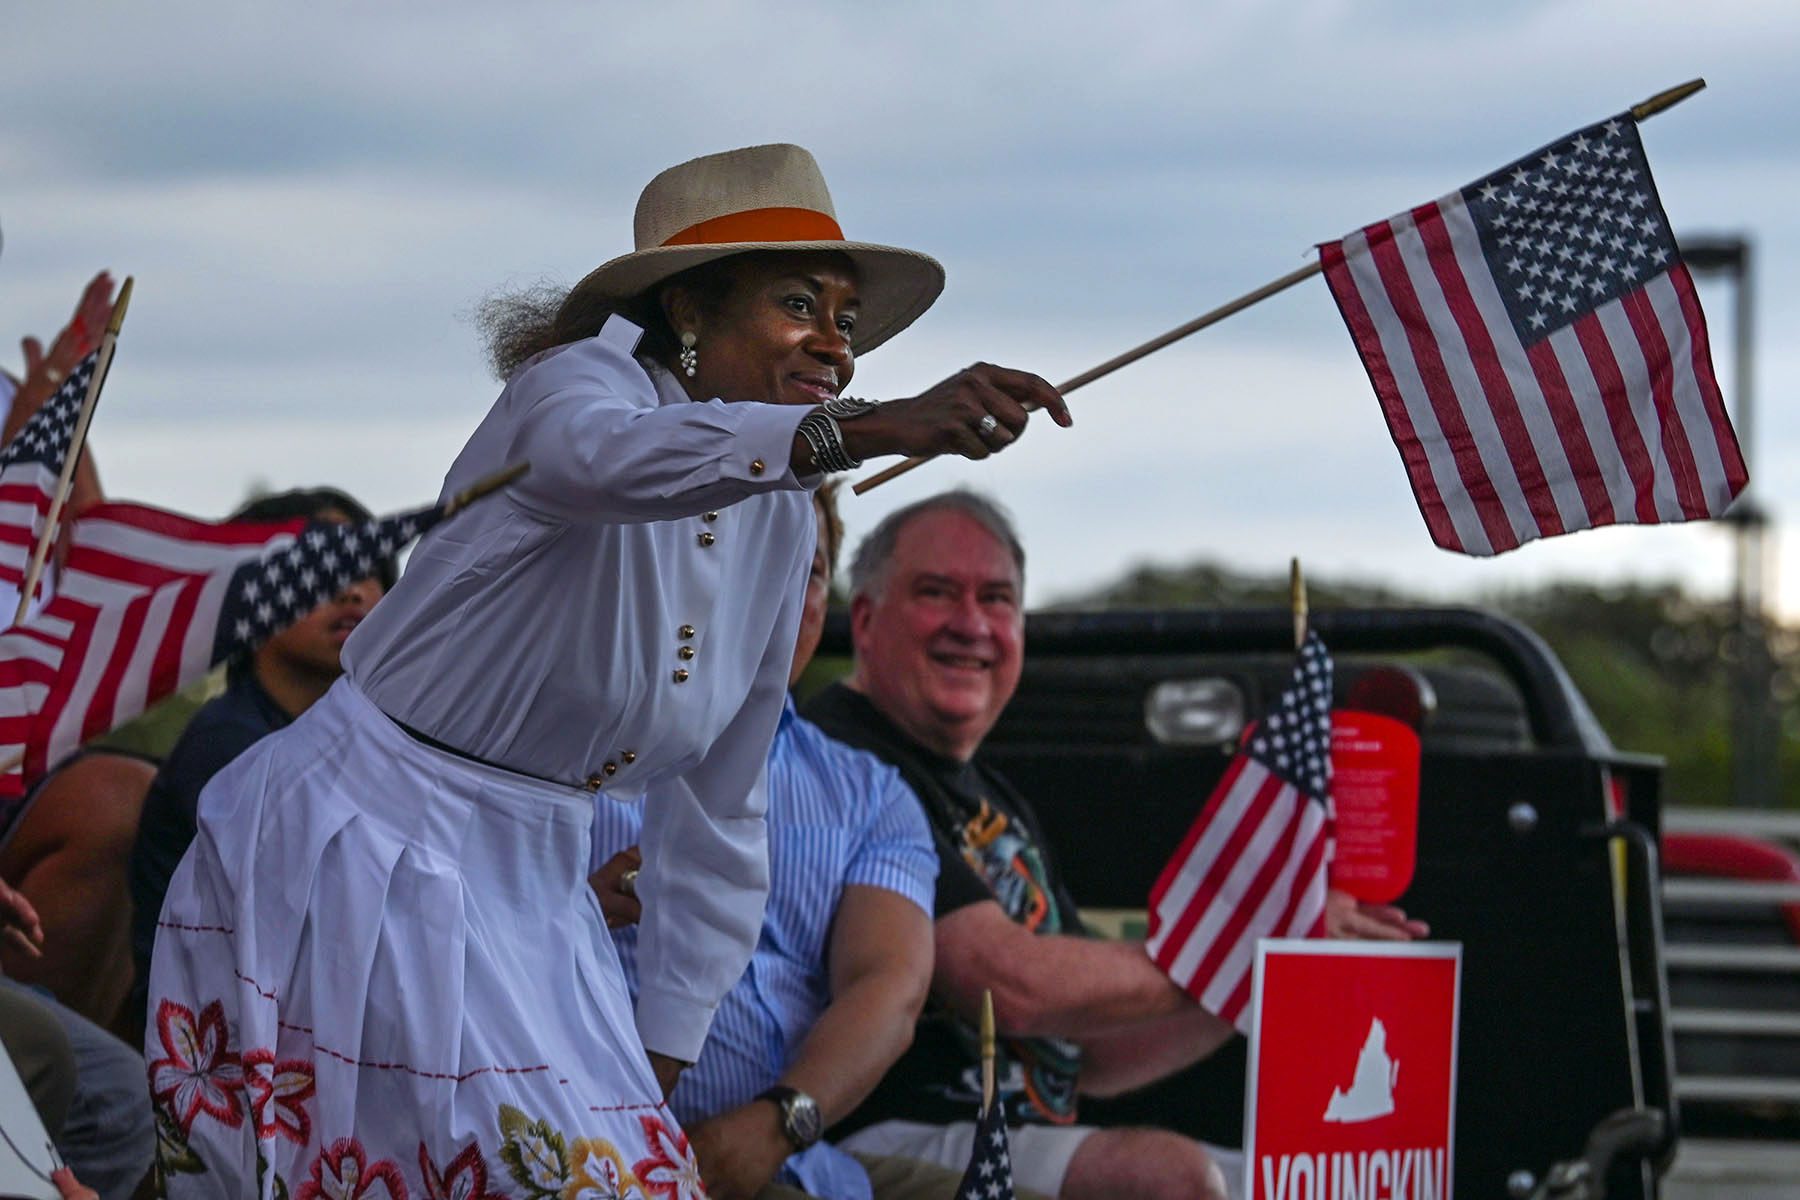 Winsome Sears smiles and waves an American flag at an event.